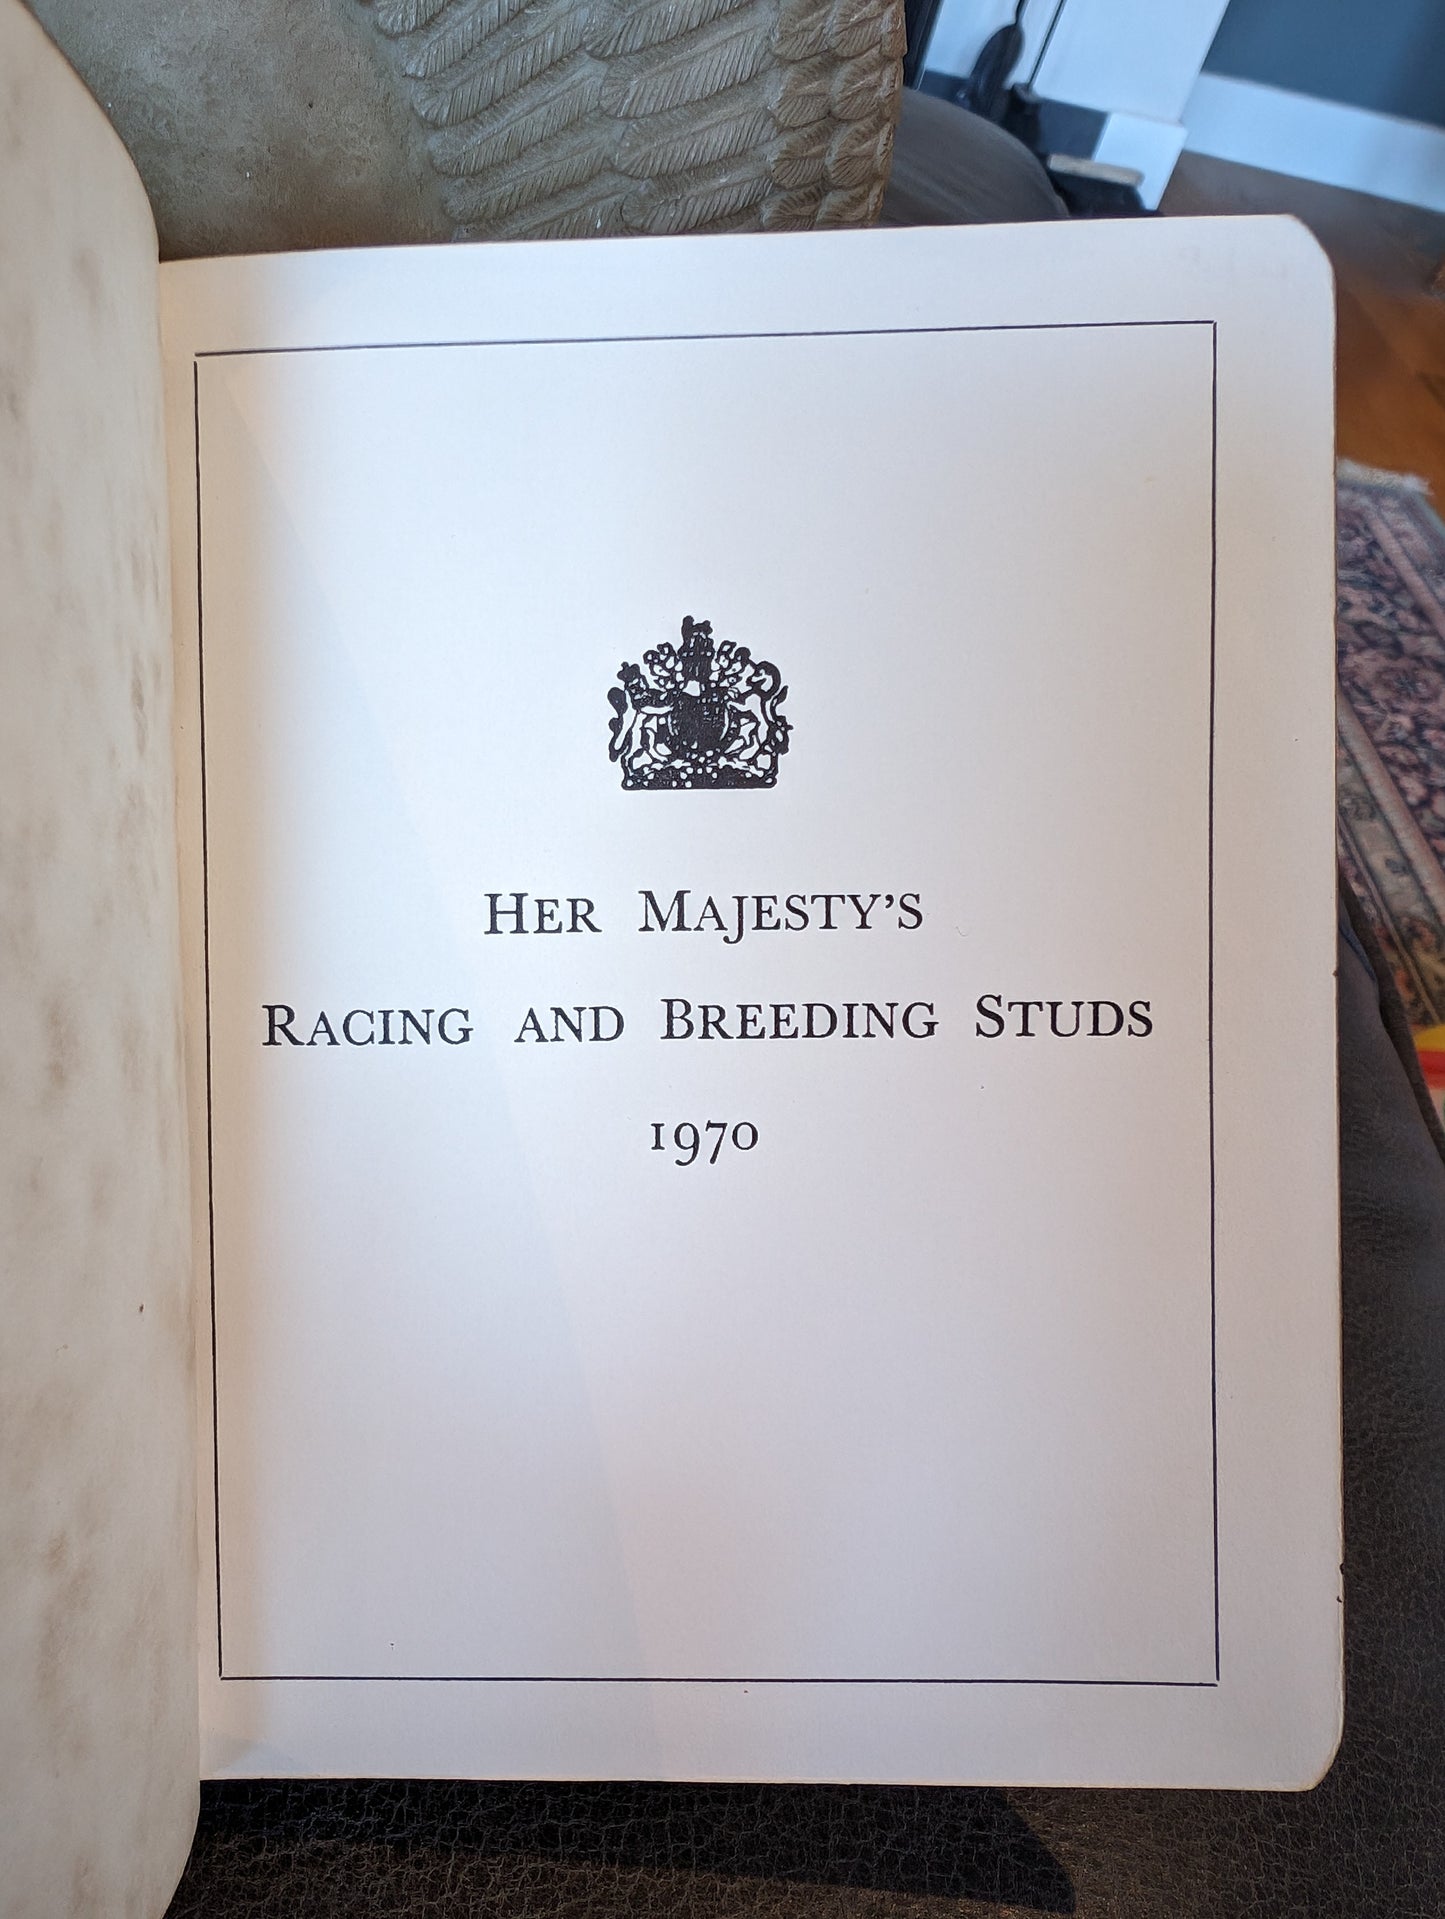 Her Majesty's Racing and Breeding Studs 1970